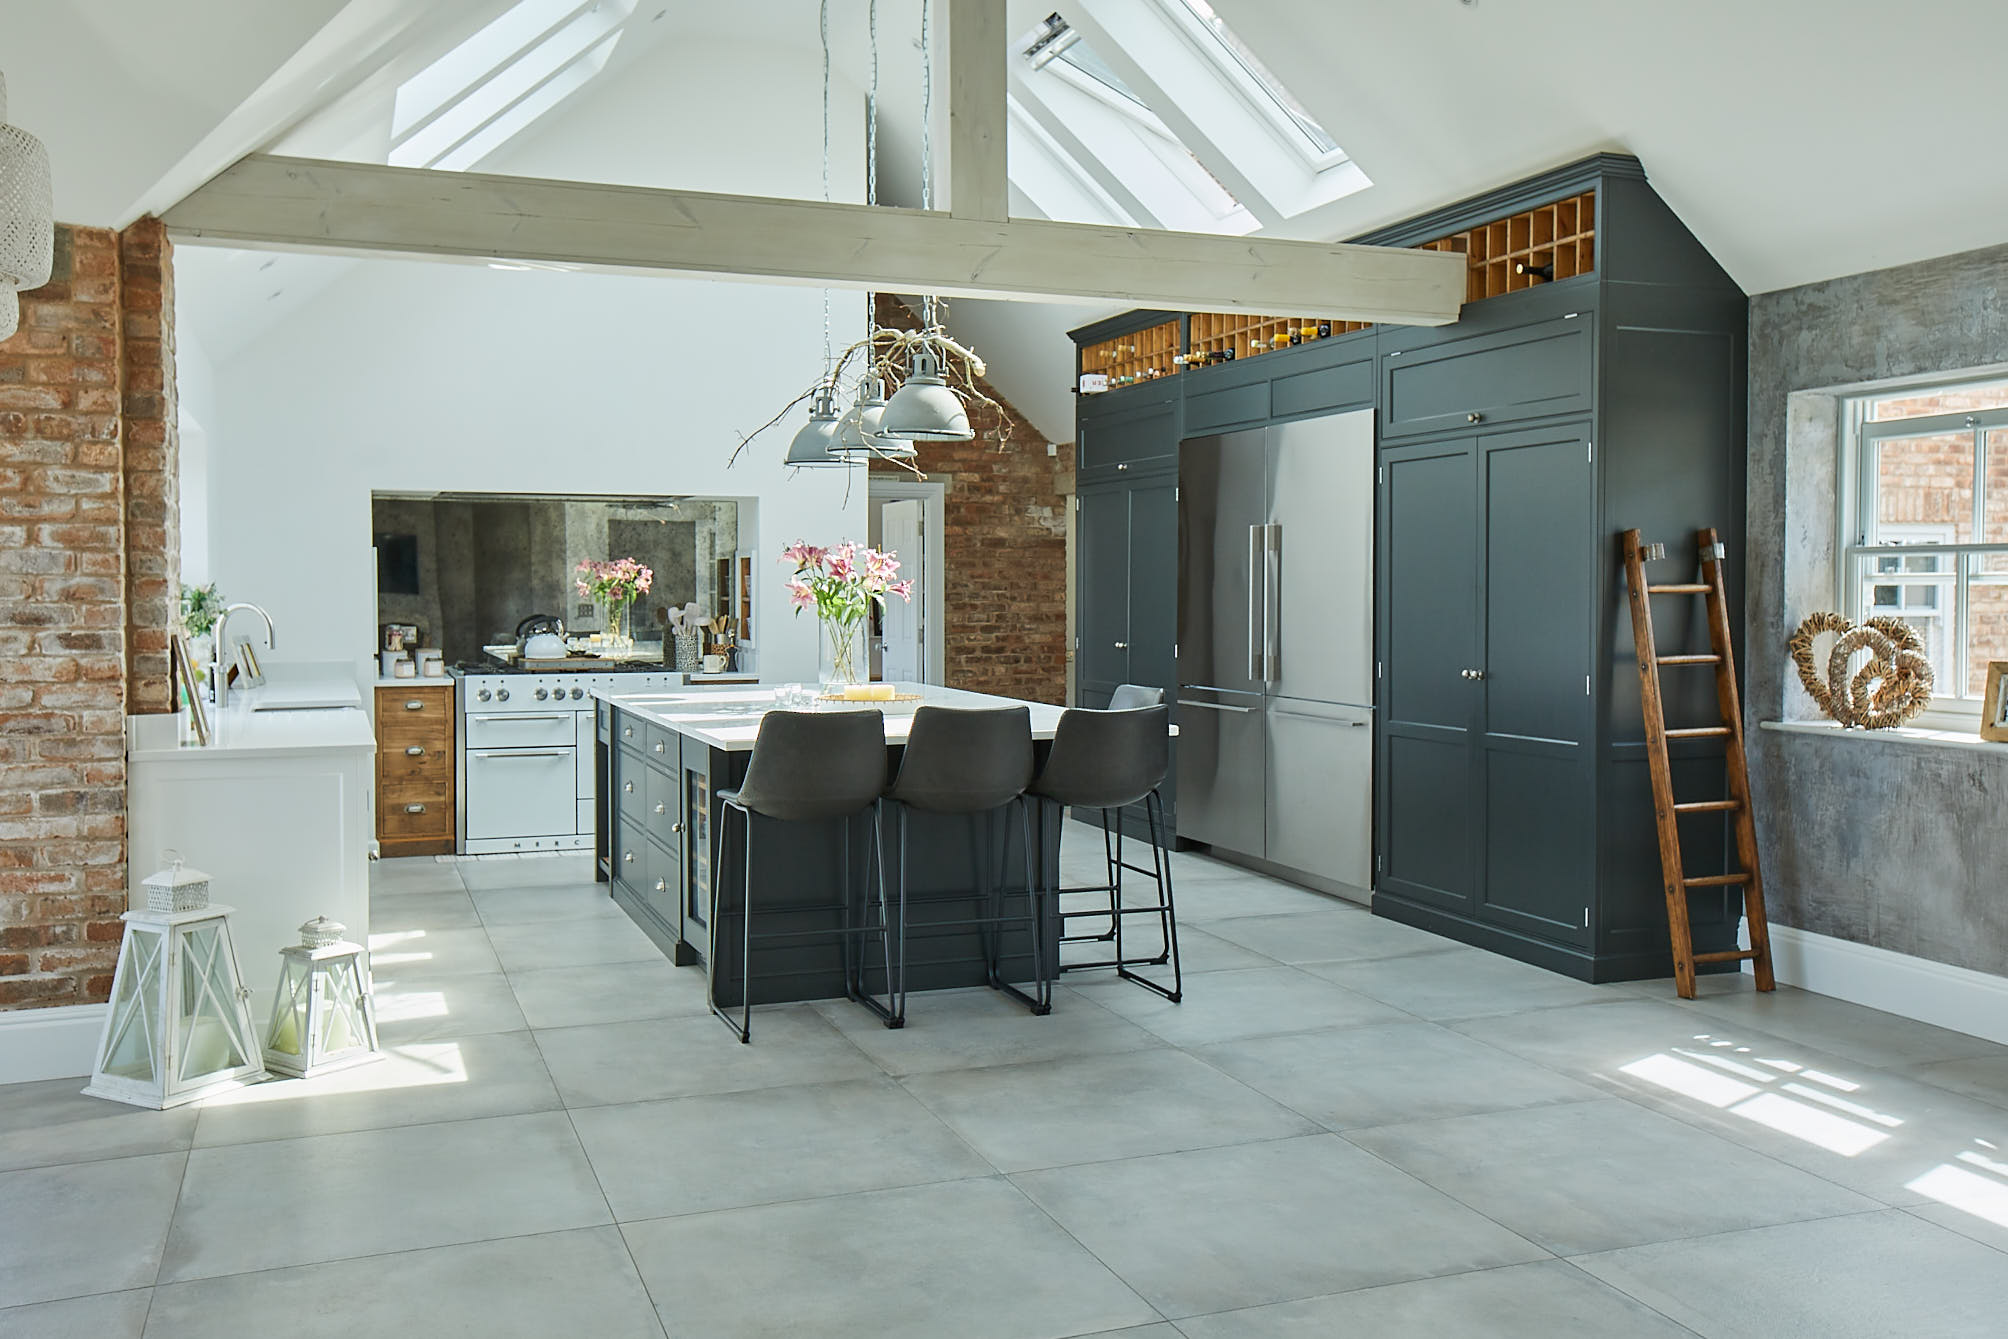 Bespoke kitchen with tall black cabinets and white range cooker